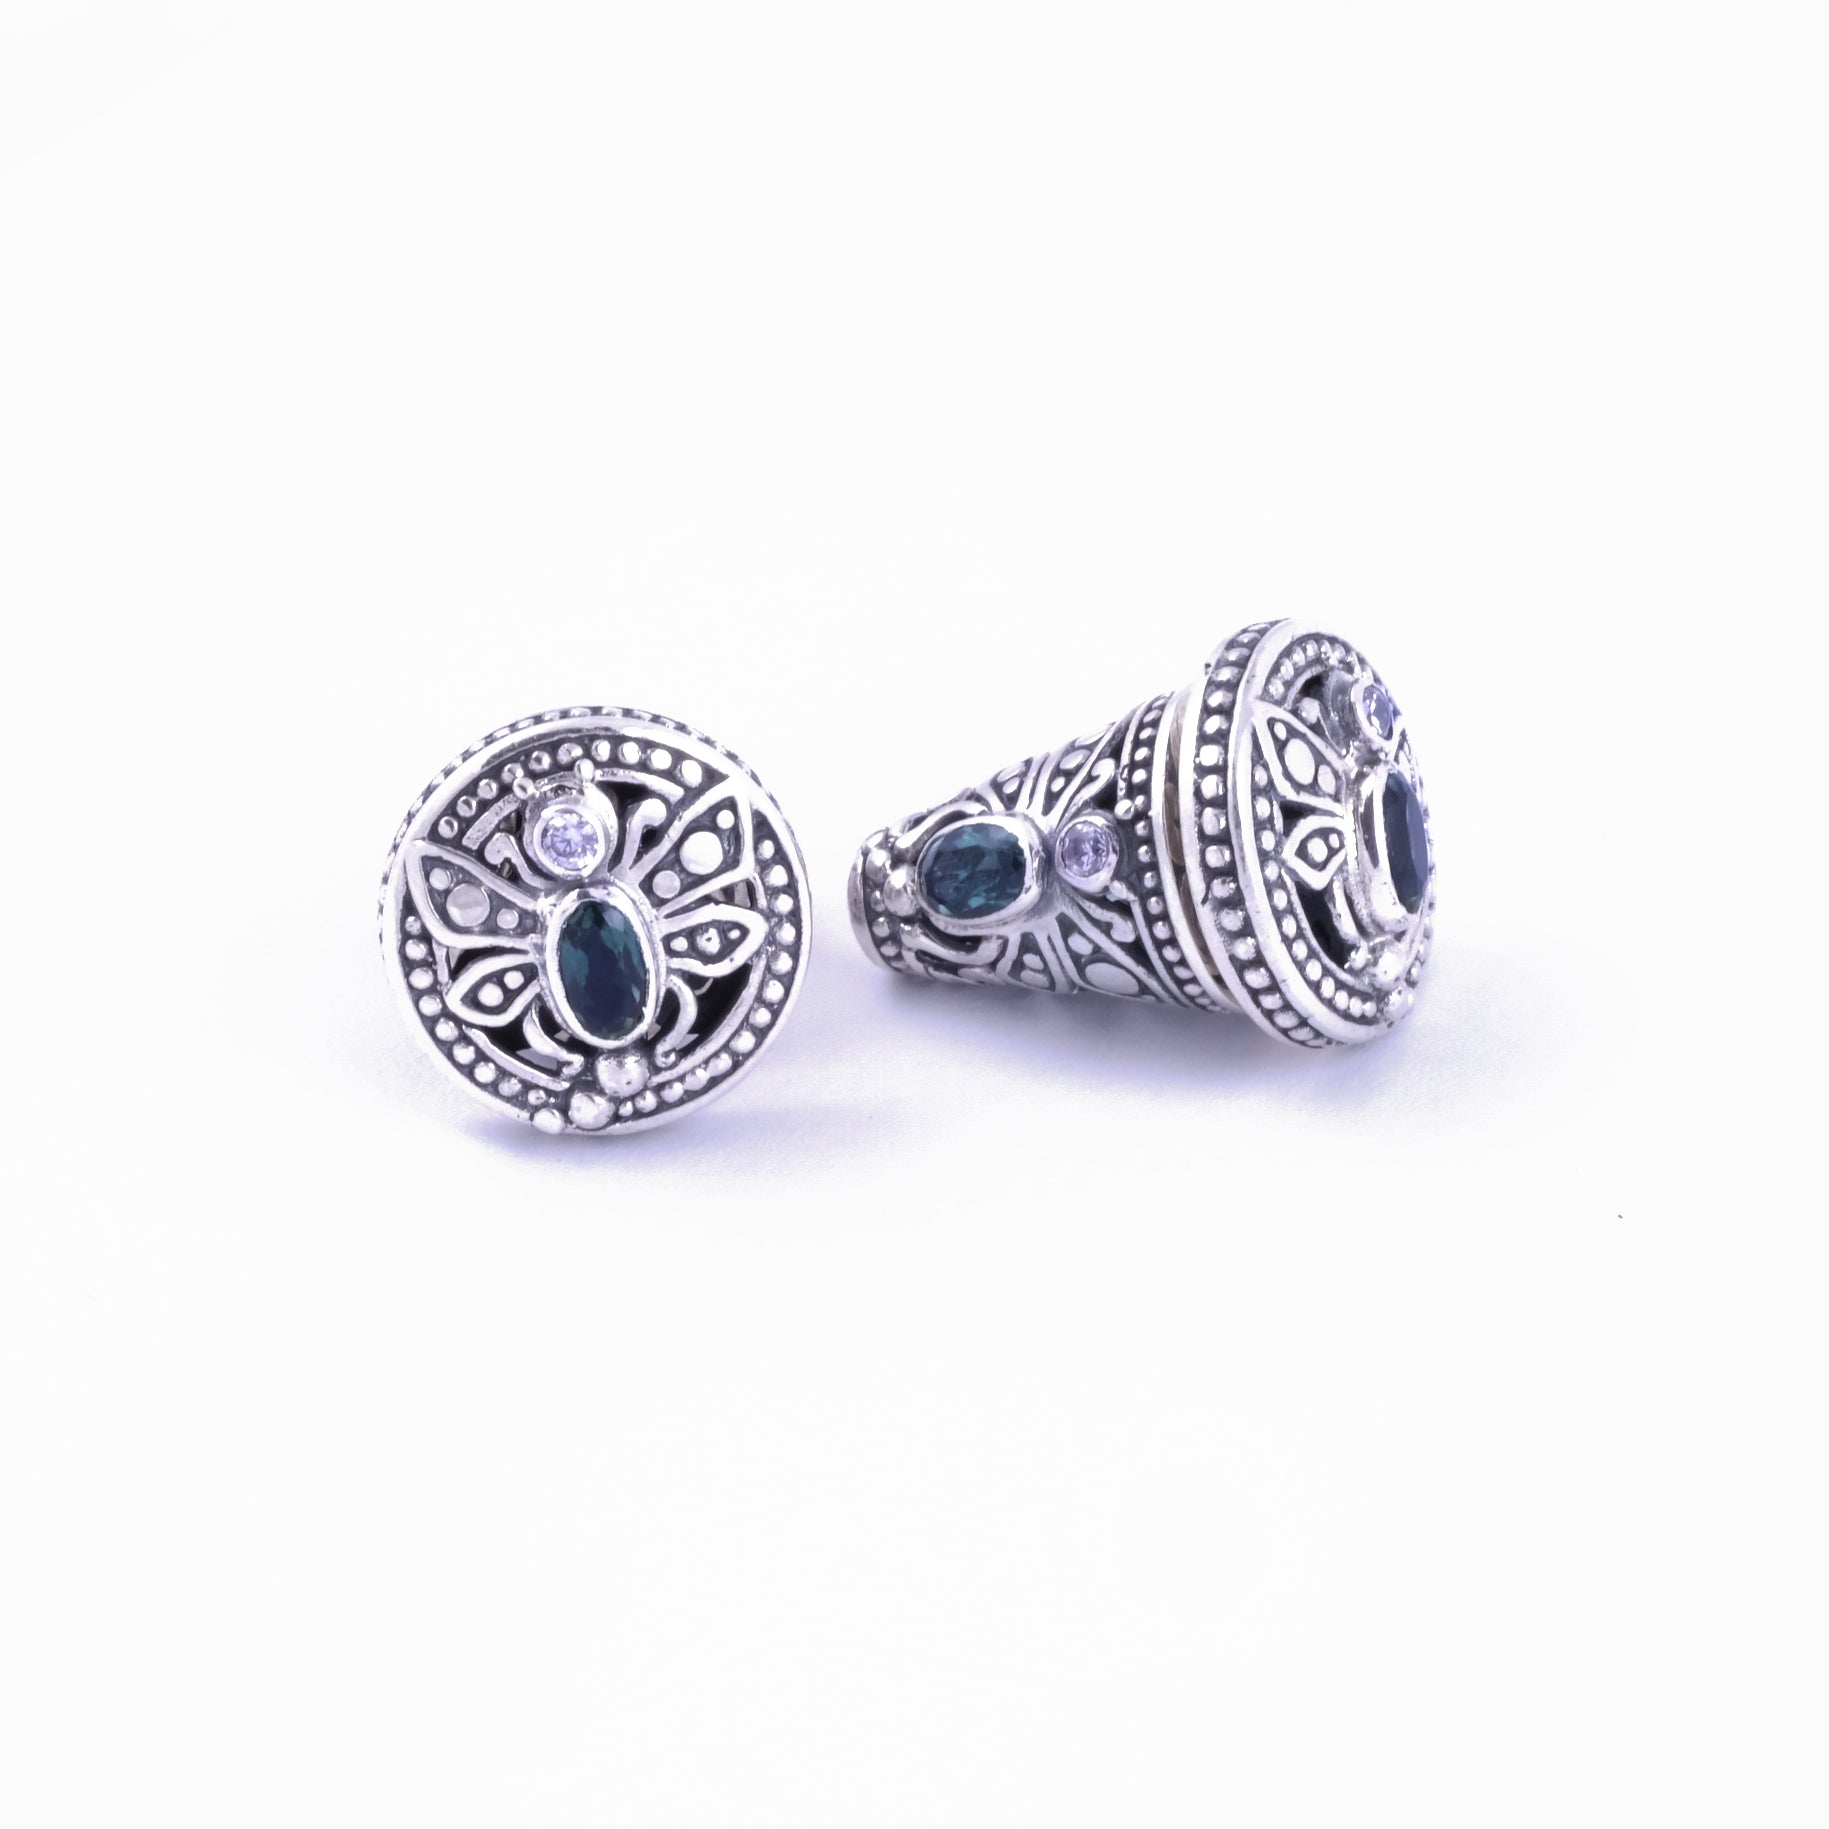 Capung Bali Traditional Balinese Stud Earrings in Sterling Silver (small)